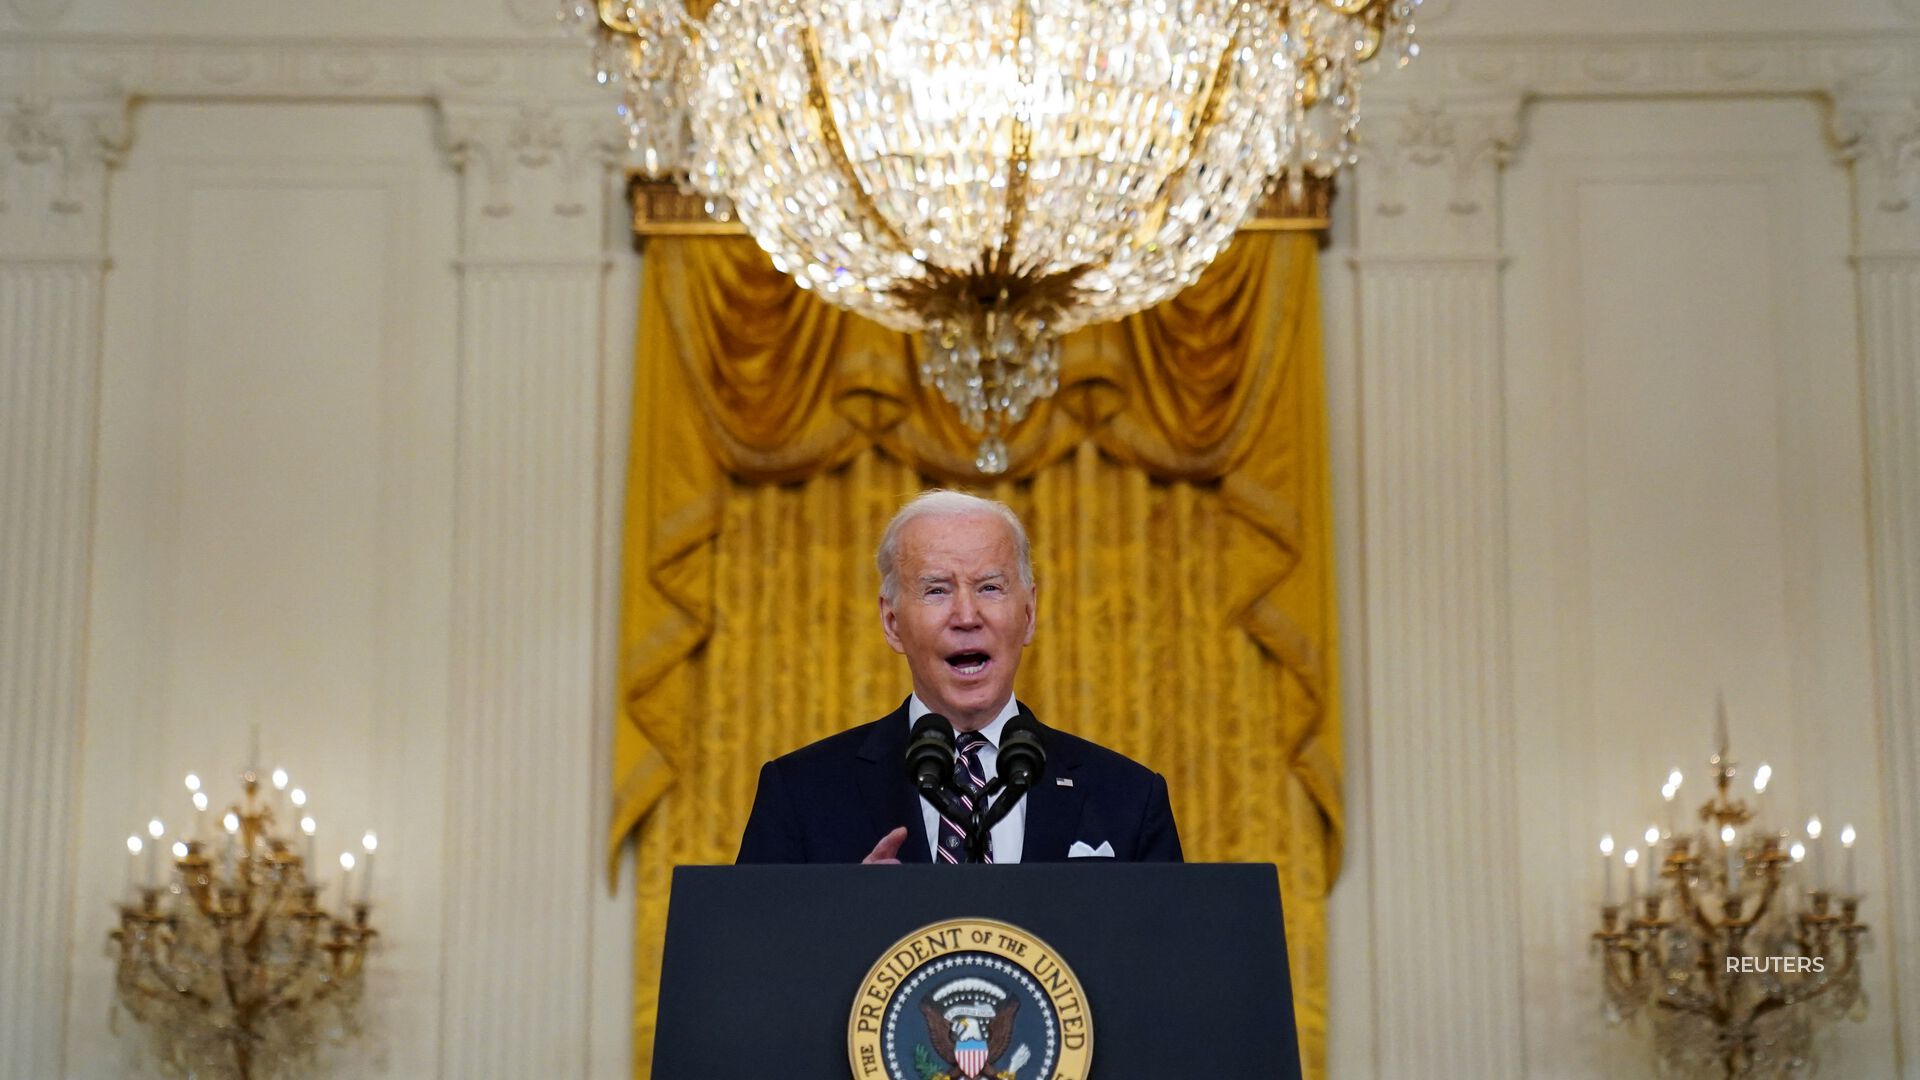 President Joe Biden announced the White House has issued its first round of sanctions following Russia's invasion of Ukraine.